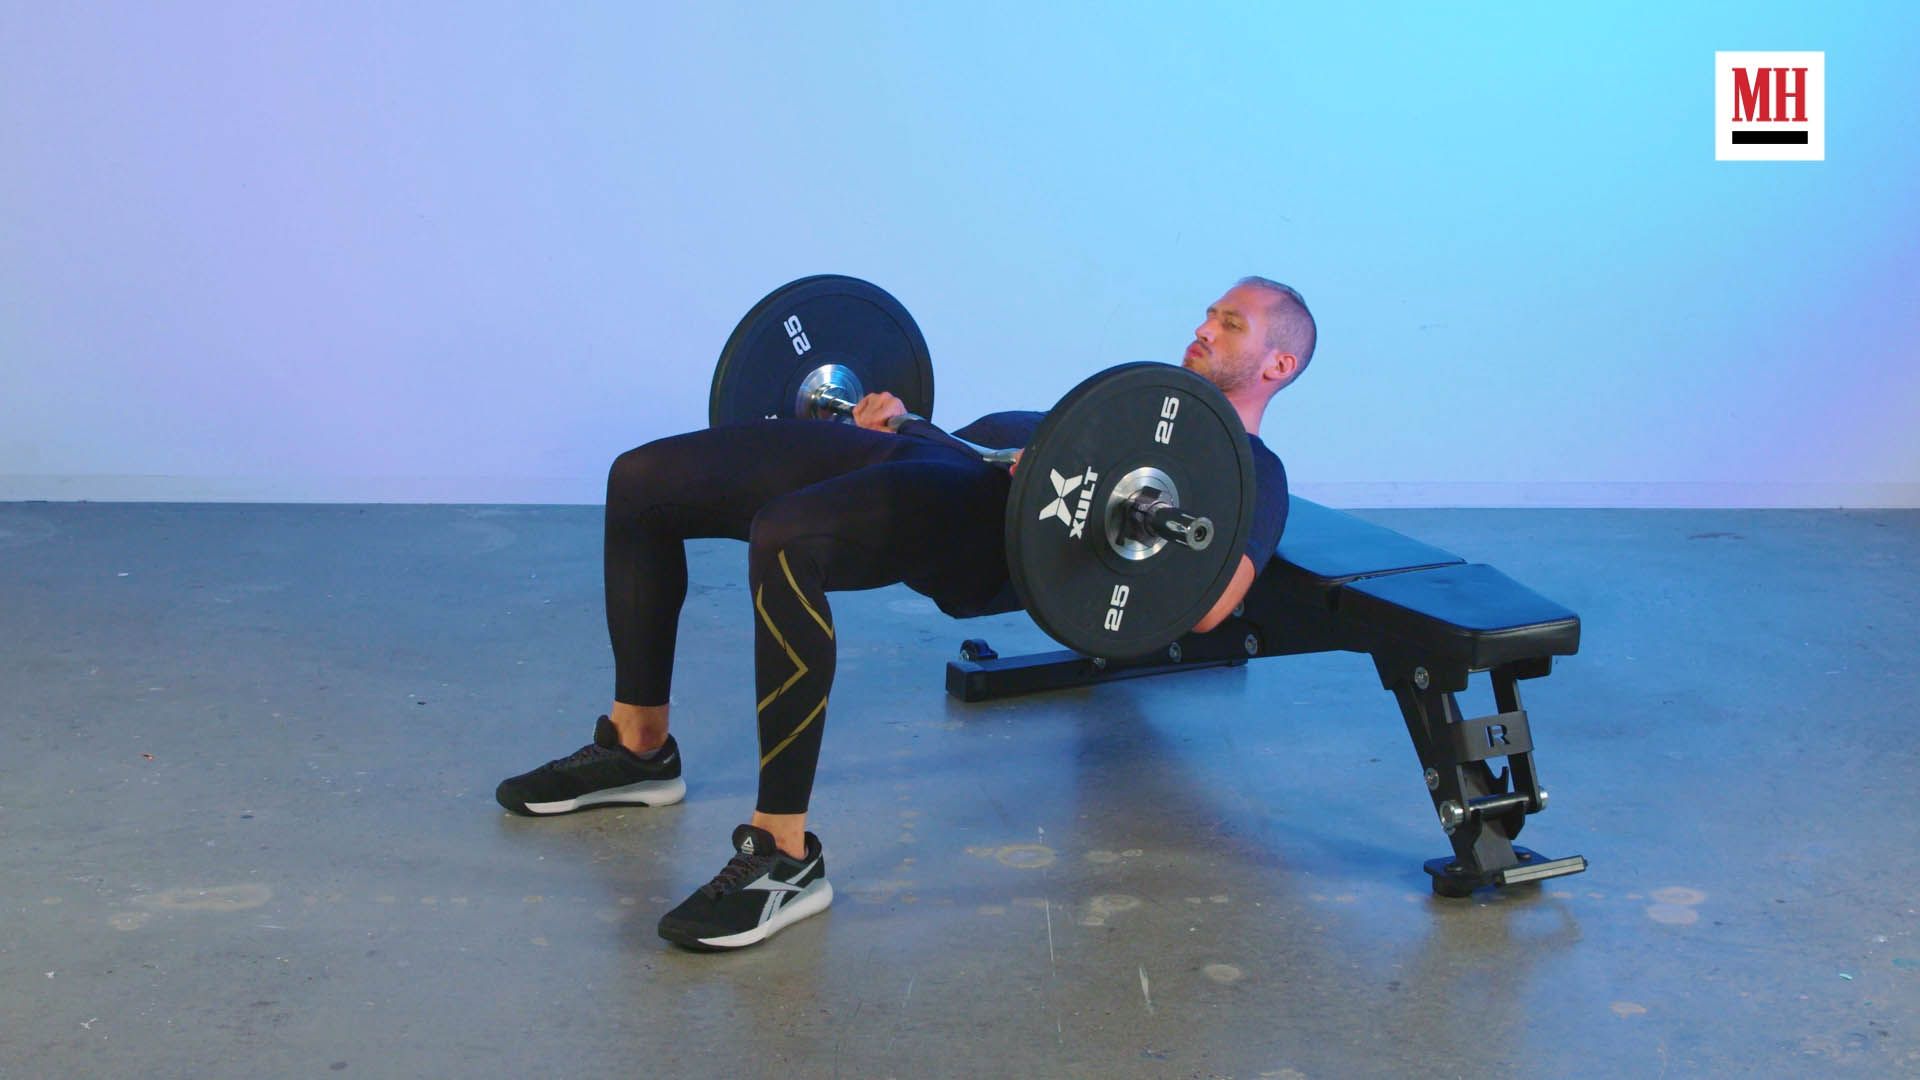 How to Do a Barbell Hip Thrust